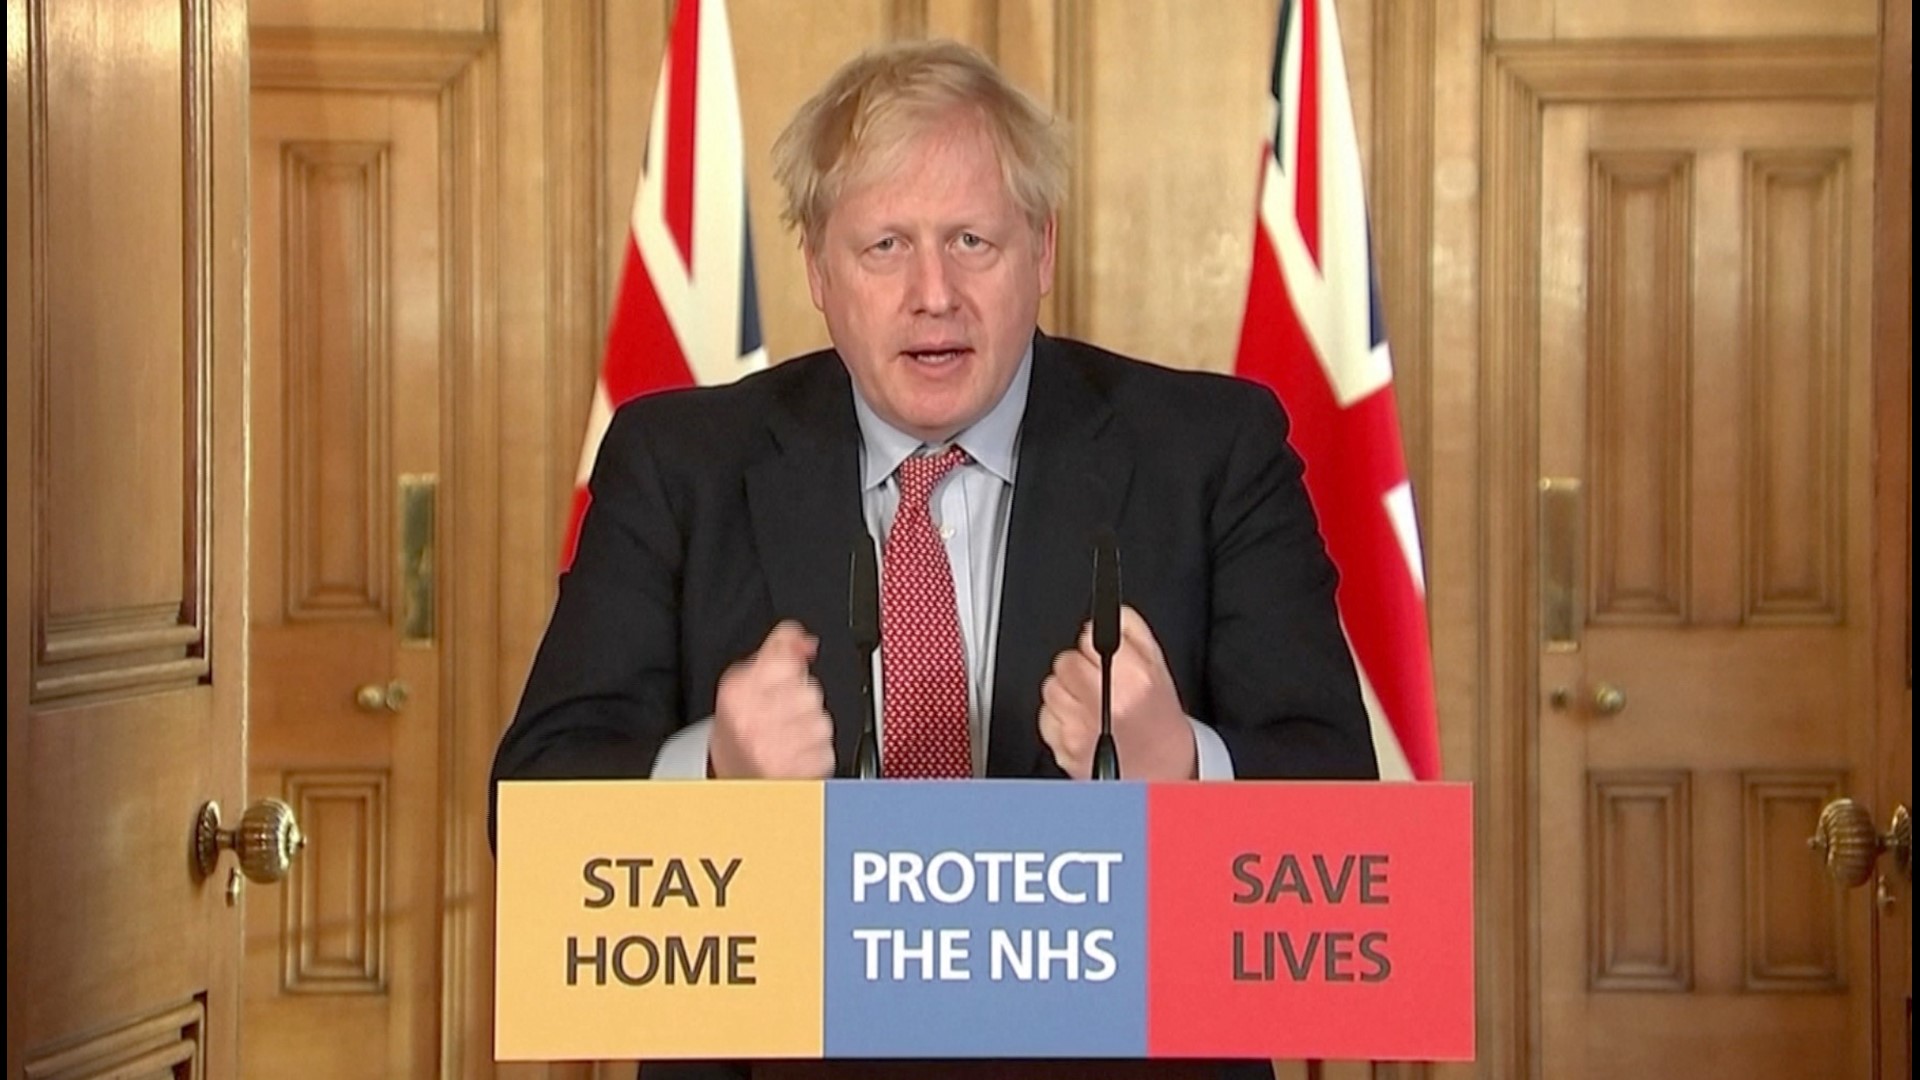 Boris Johnson reveals that he has tested positive for COVID-19. Veuer's Justin Kircher has the story.